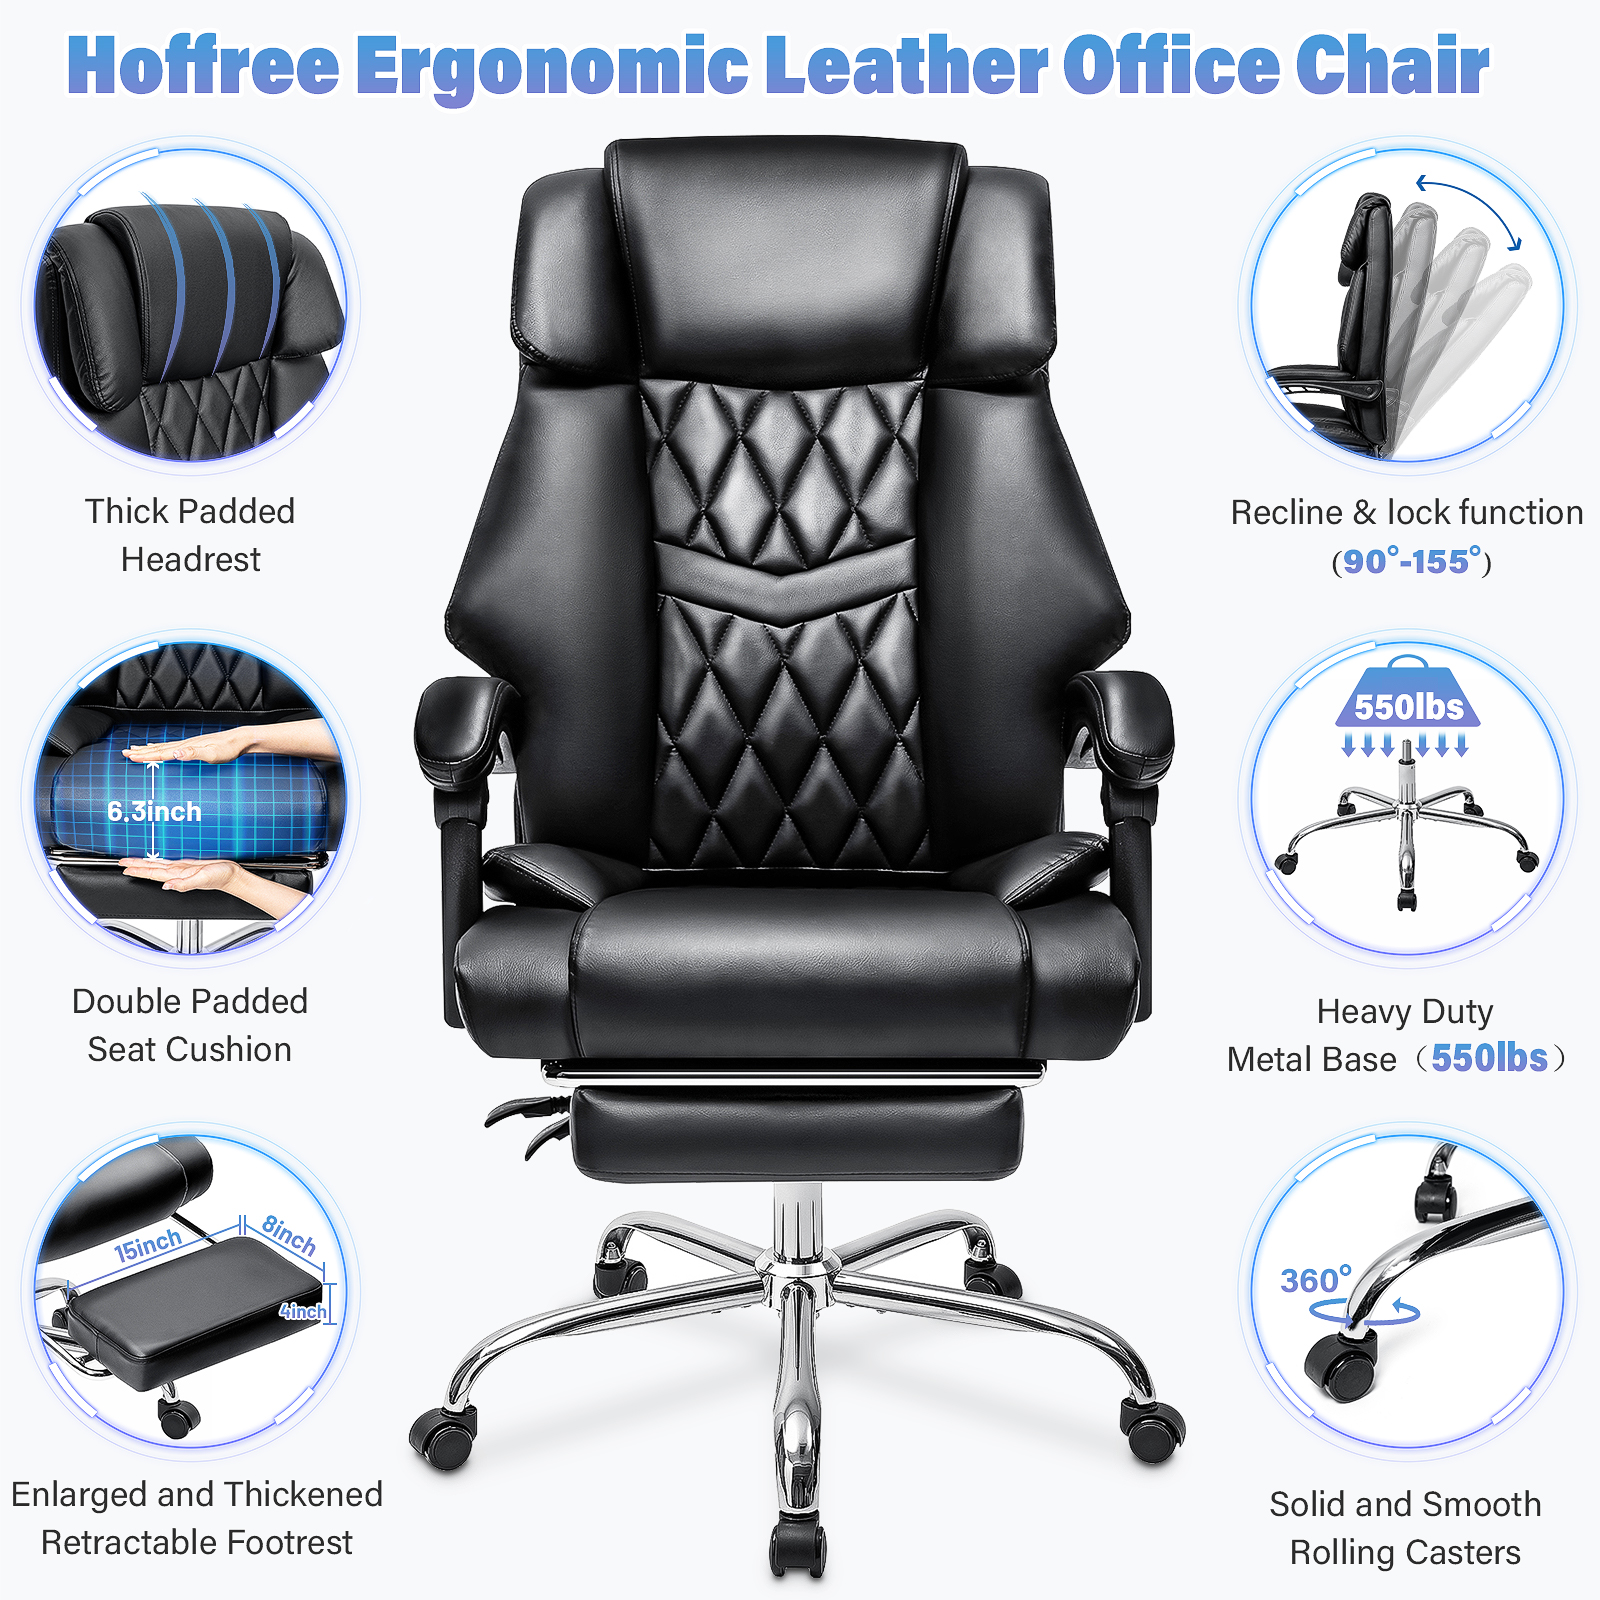 Hoffree Executive Office Chair Big and Tall Office Chair 550lb Wide Seat Ergonomic Computer Desk Chair High Back Leather Chair with Lumbar Back Support for Home Office Black - image 3 of 9